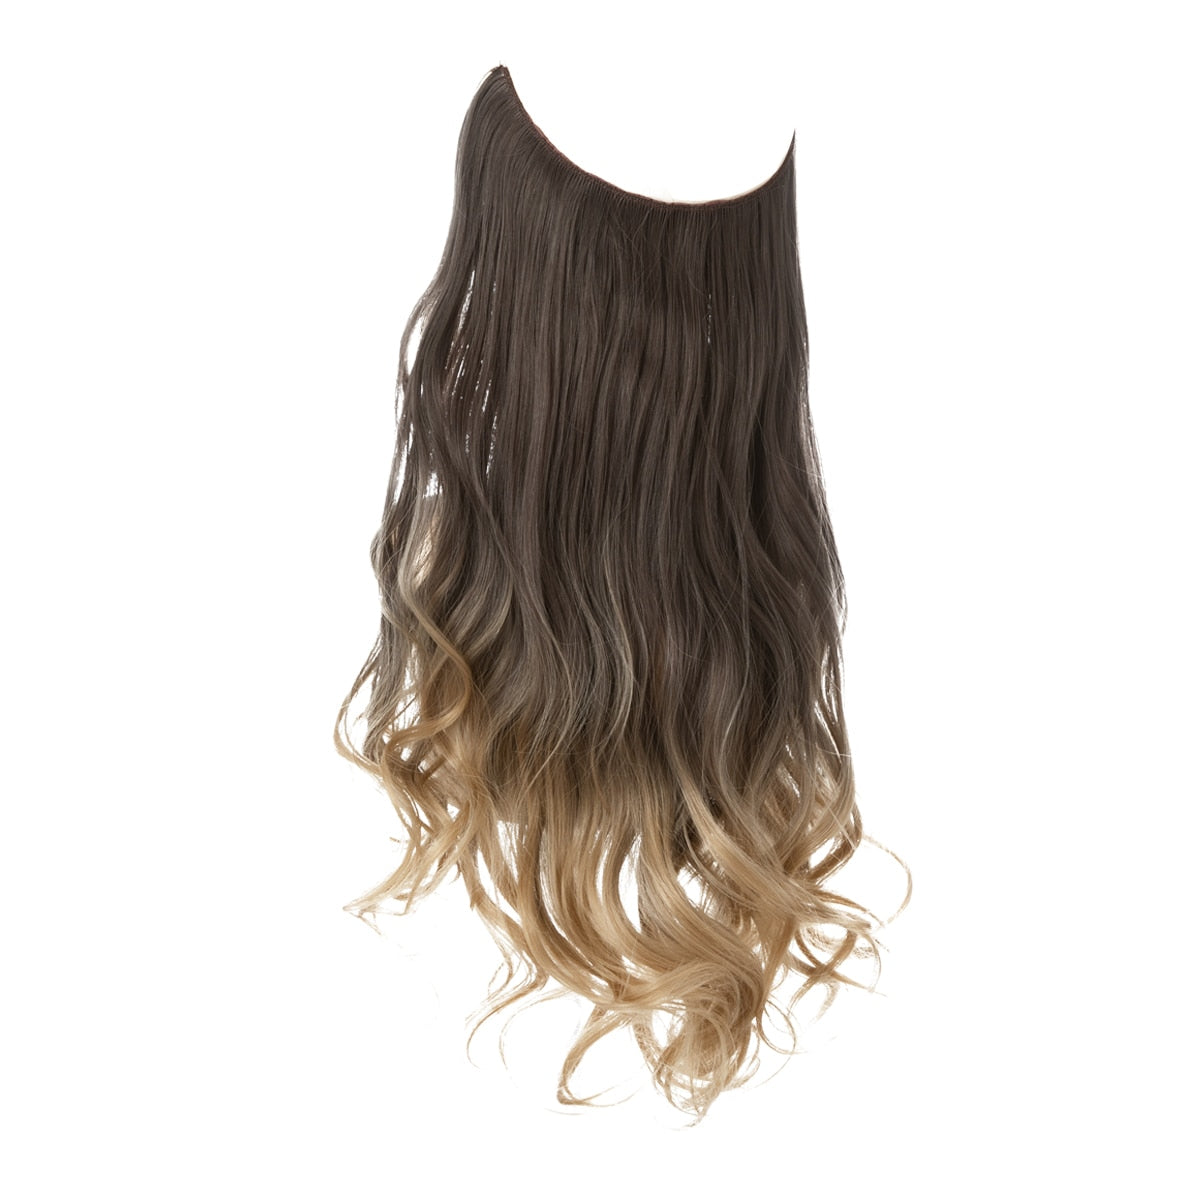 TEEK - Invisible Synth No Clip No Comb Wave Hair Extensions | Dark Varieties HAIR theteekdotcom 6T25 14inches 